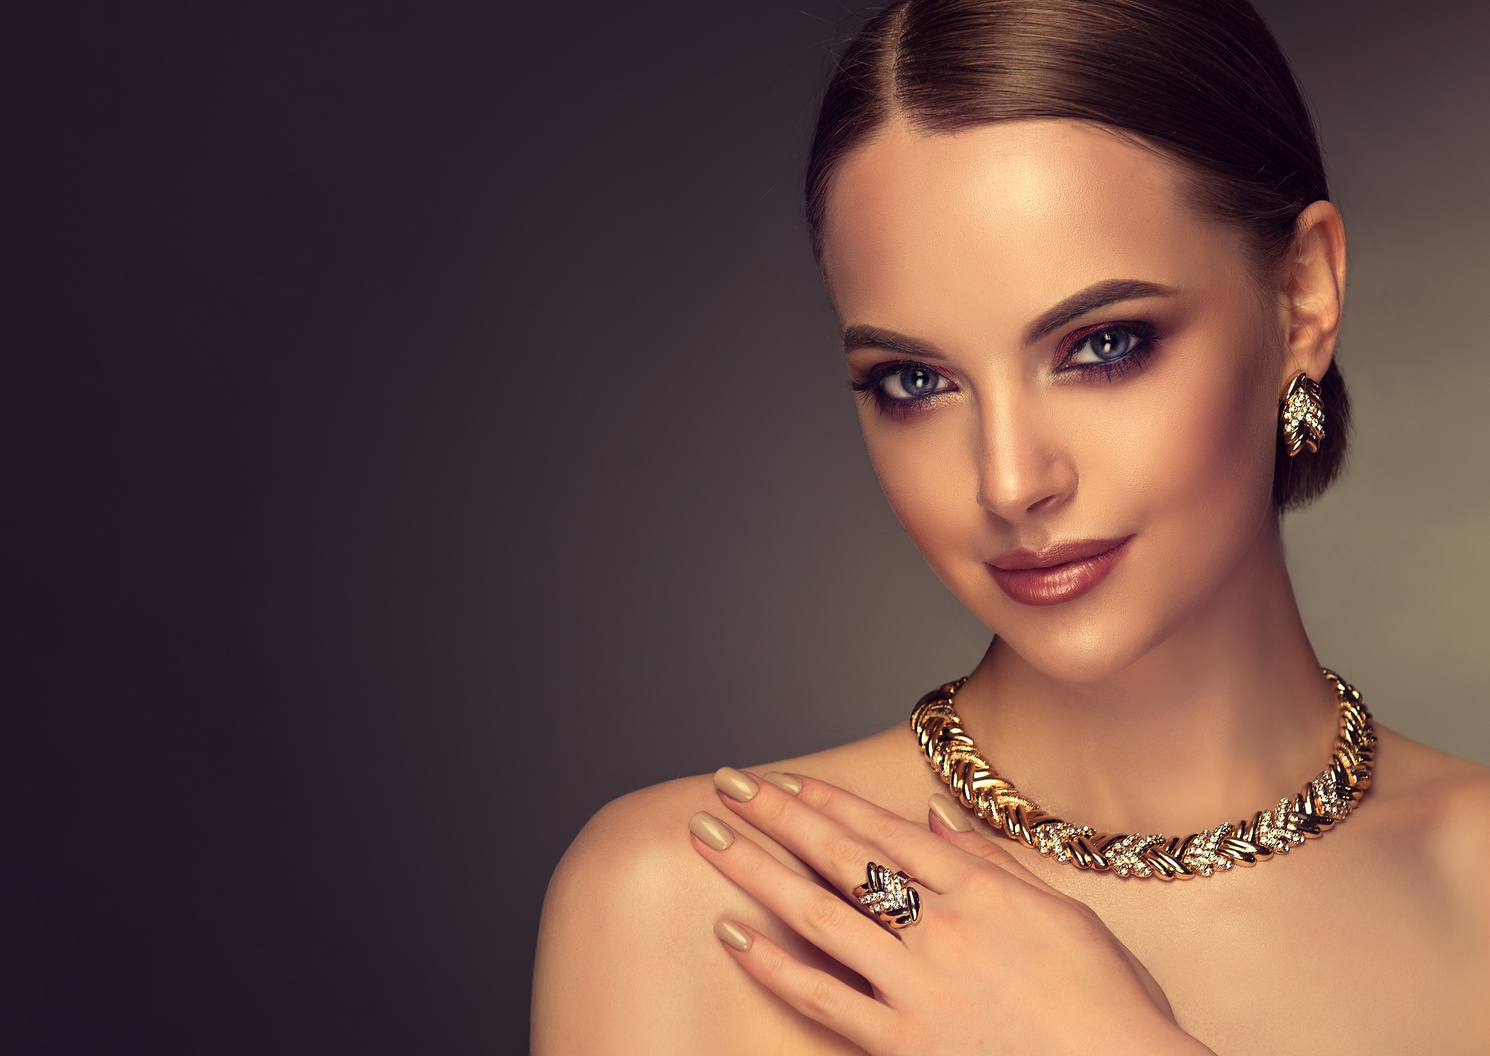 Pretty model with smoky-eyes makeup style is demonstrating gilded jewelry set.